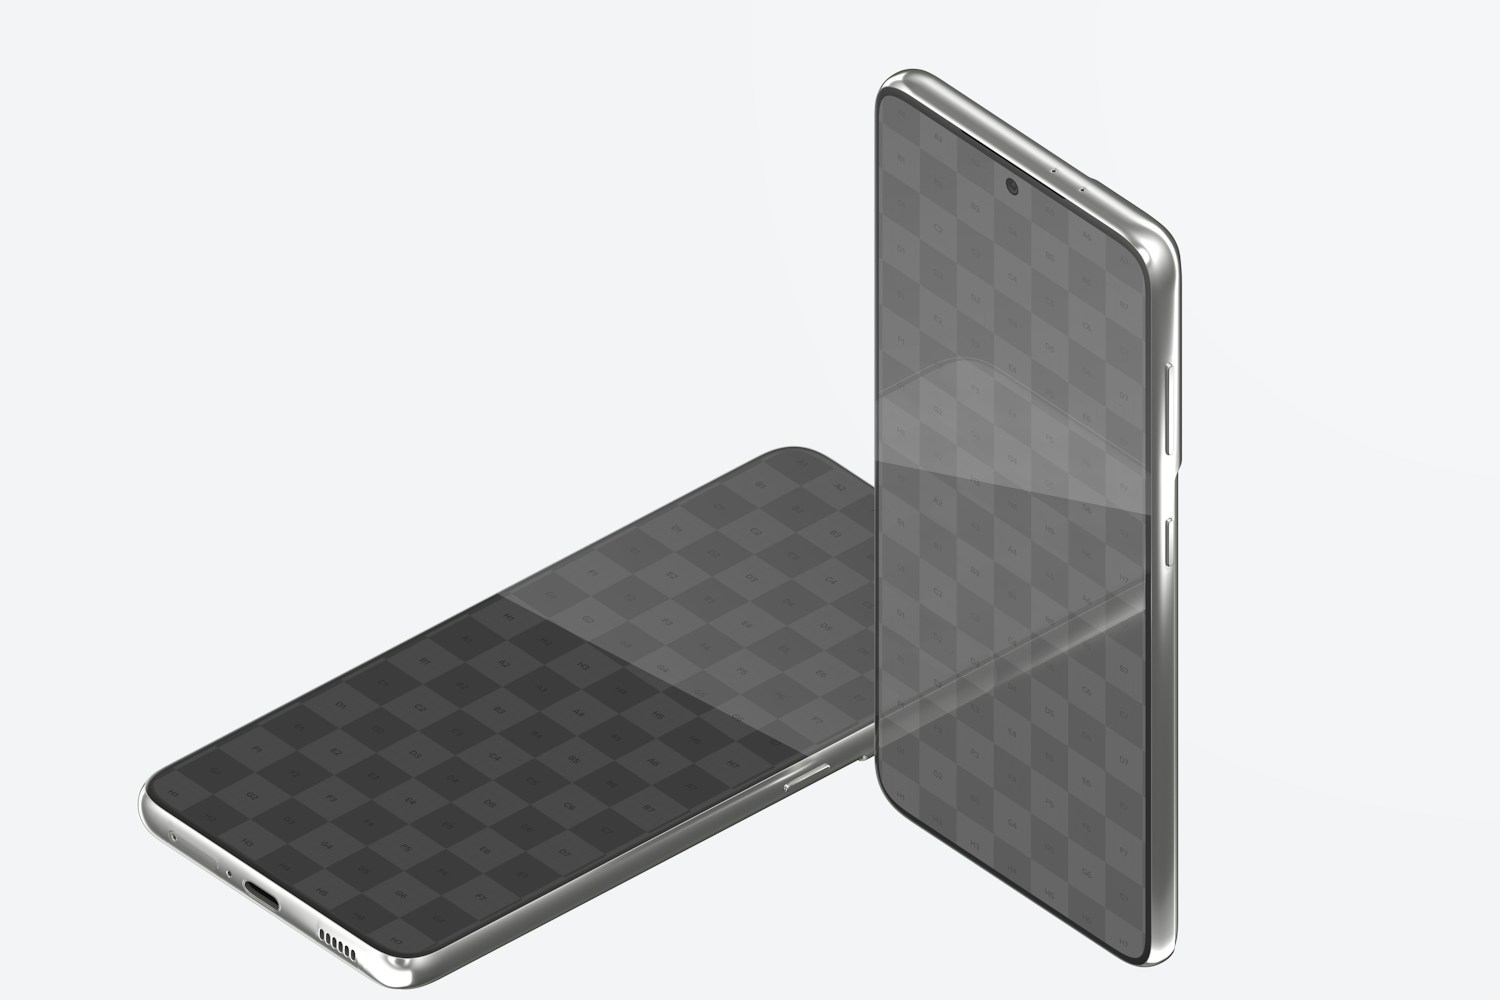 Samsung S21 Mockup, Standing and Dropped